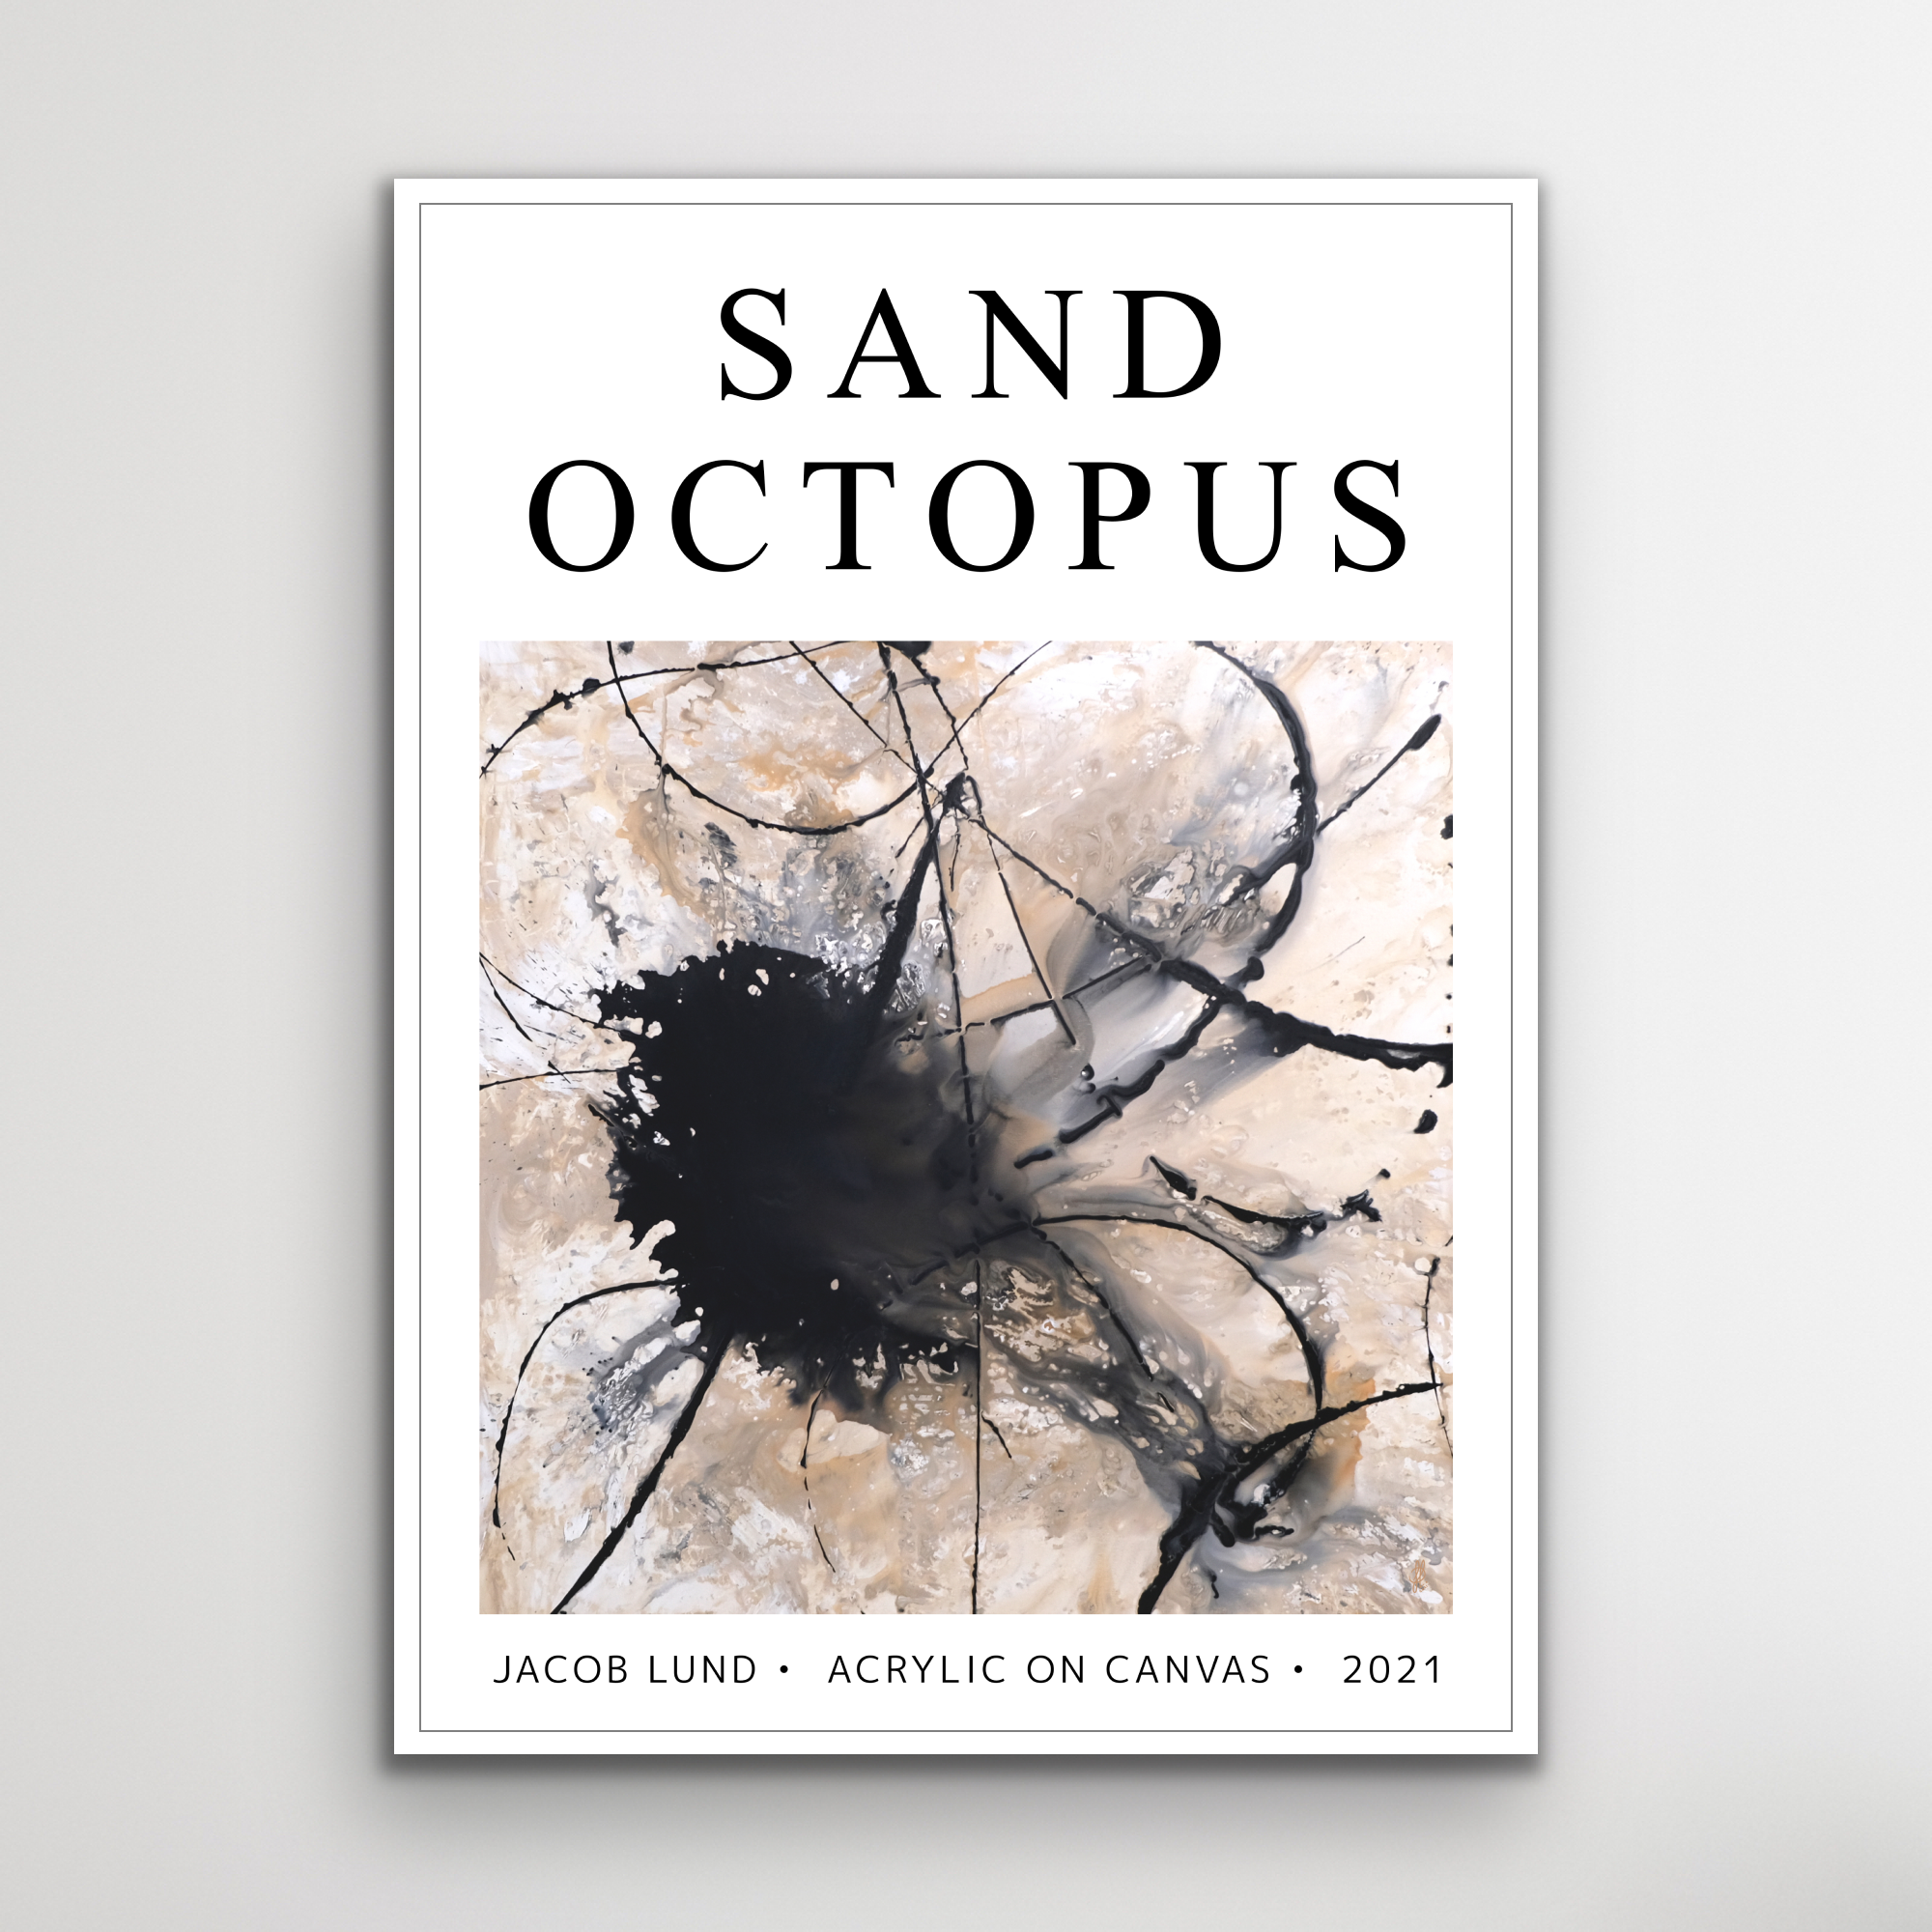 Poster: "Sand Octopus" (White background)